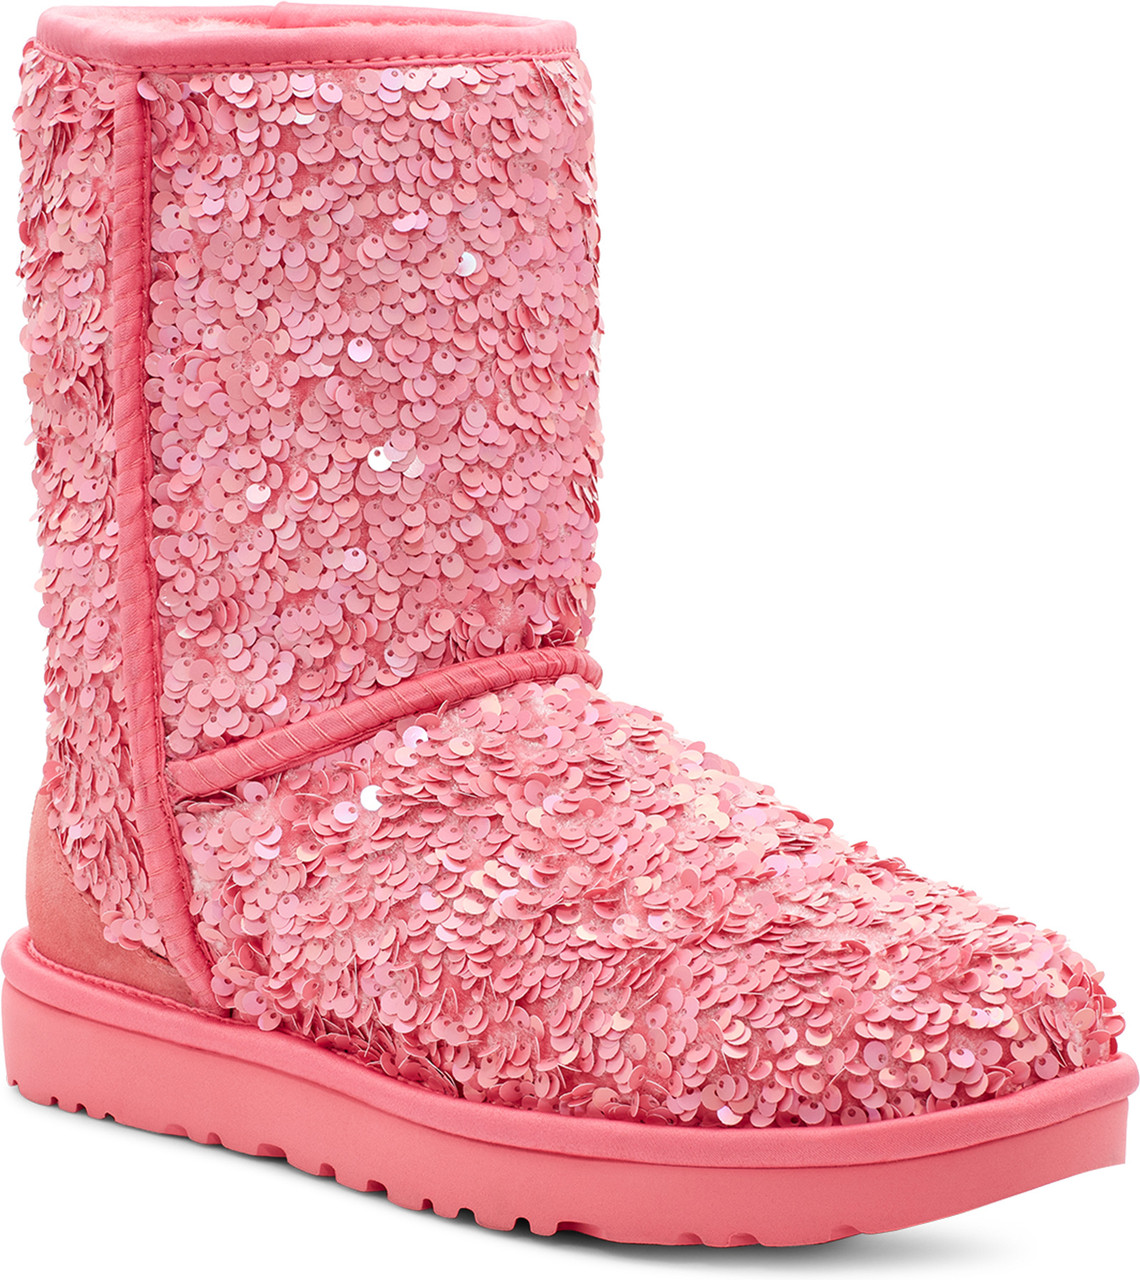 UGG CLASSIC SHORT SEQUIN PINK FASHION SPARKLE WOMEN'S BOOTS SIZE US 7/UK 5  NEW